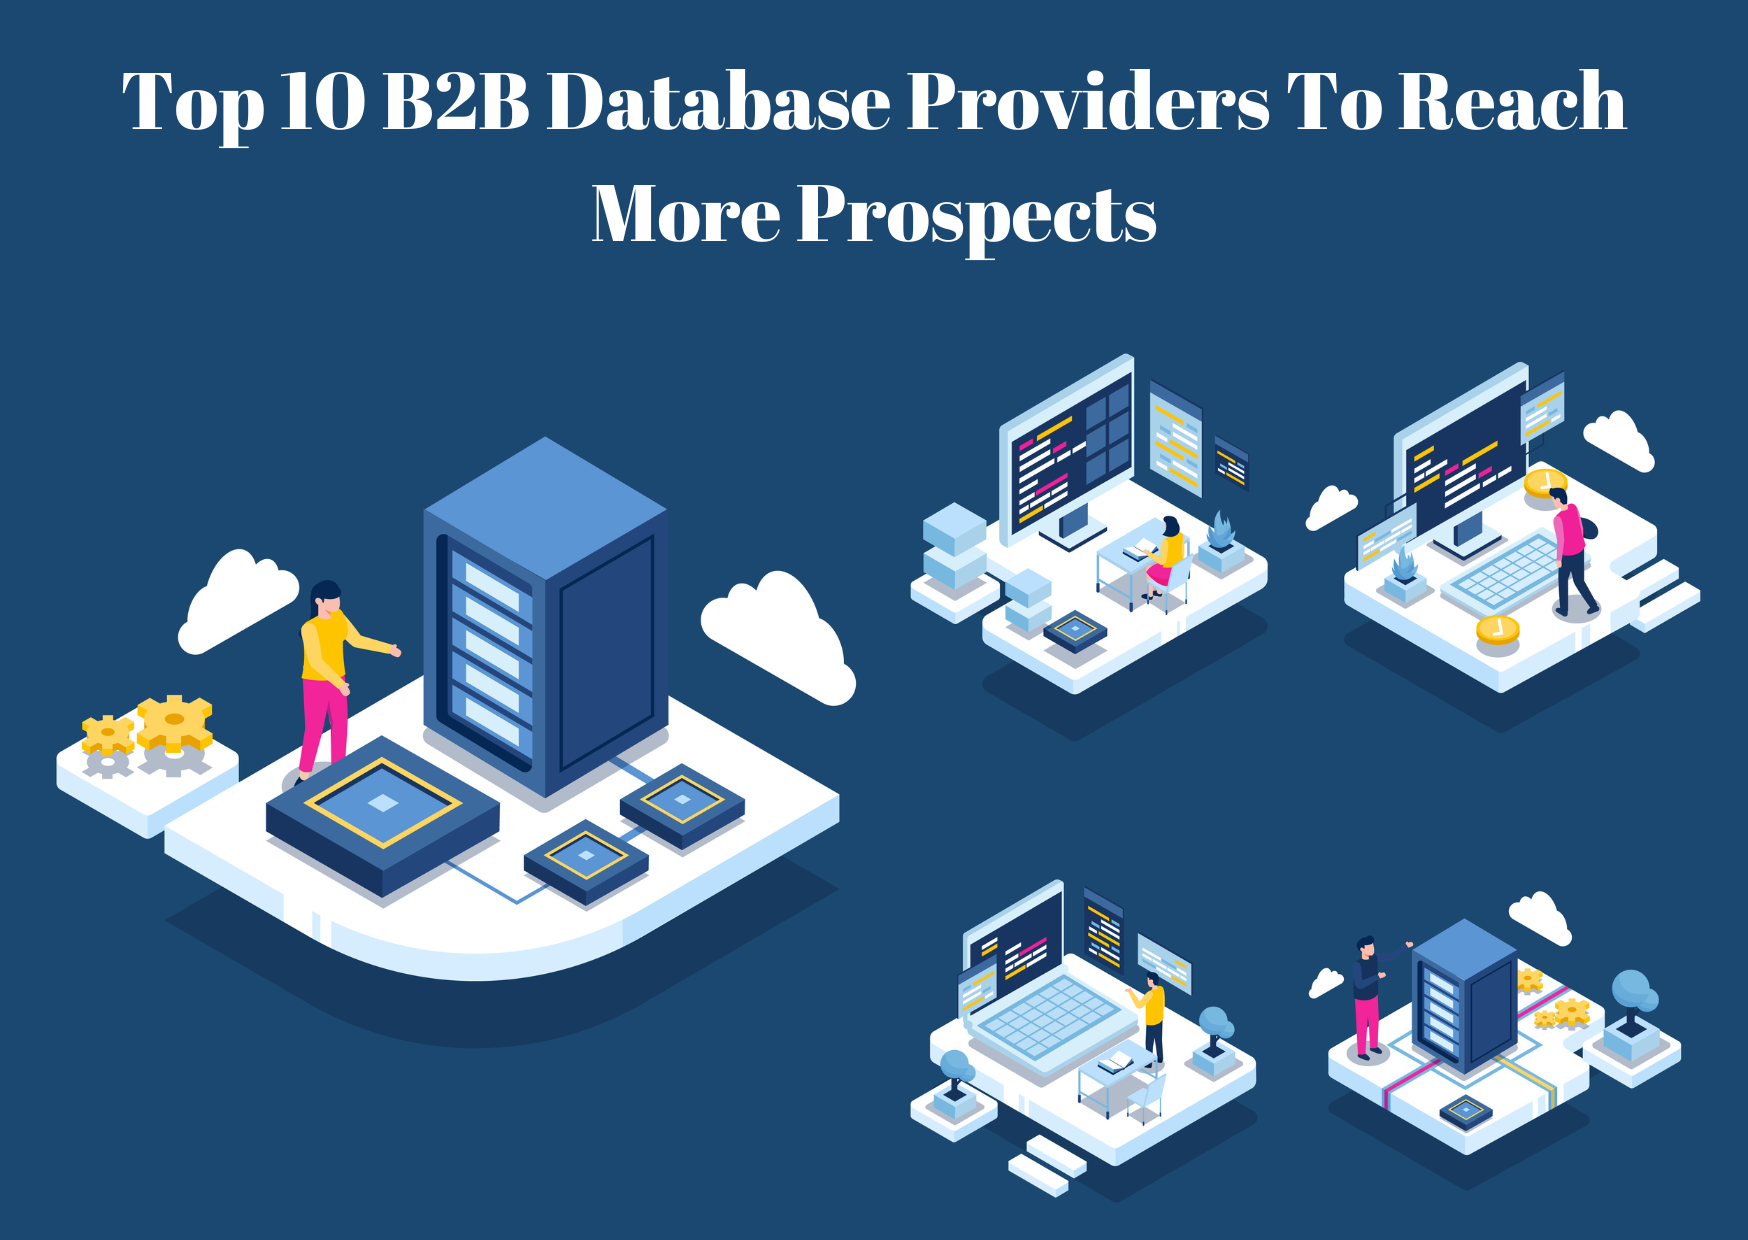 Top 10 B2B Database Providers To Reach More Prospects